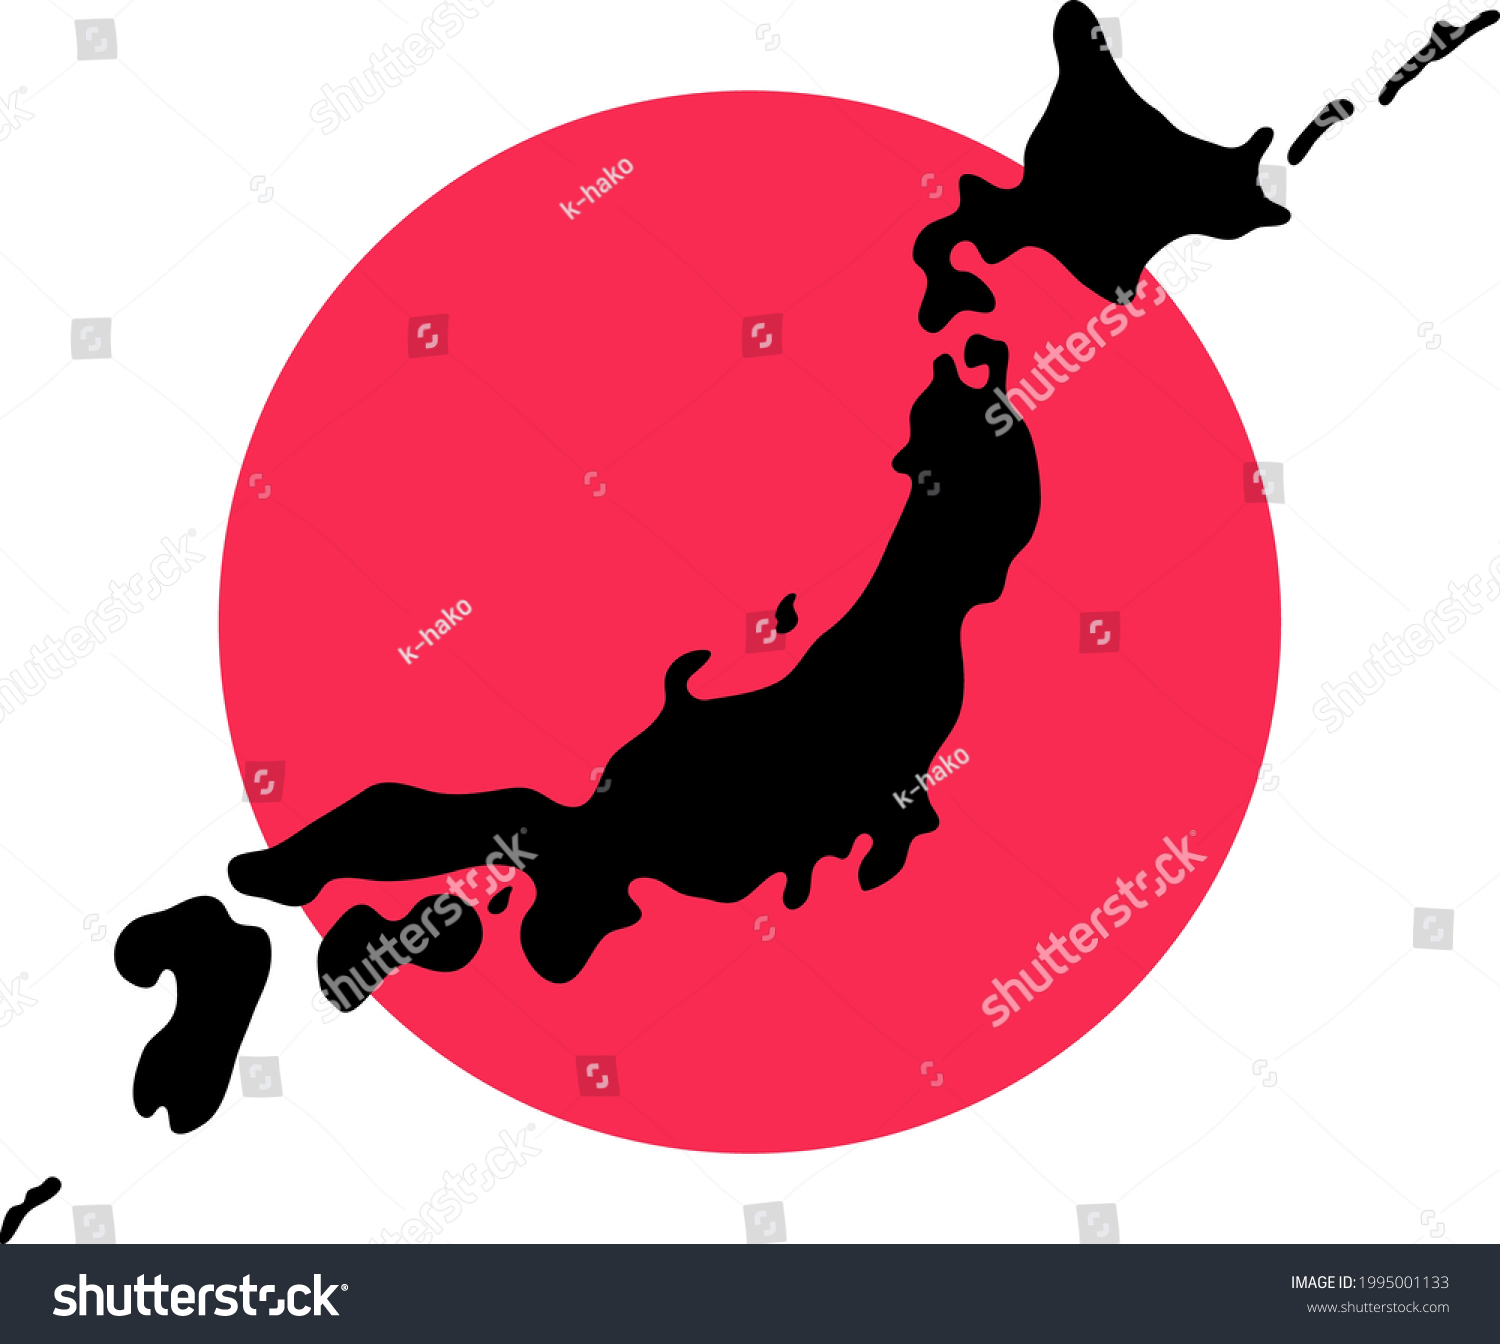 Japan flag and Japan map. (details omitted) #1995001133